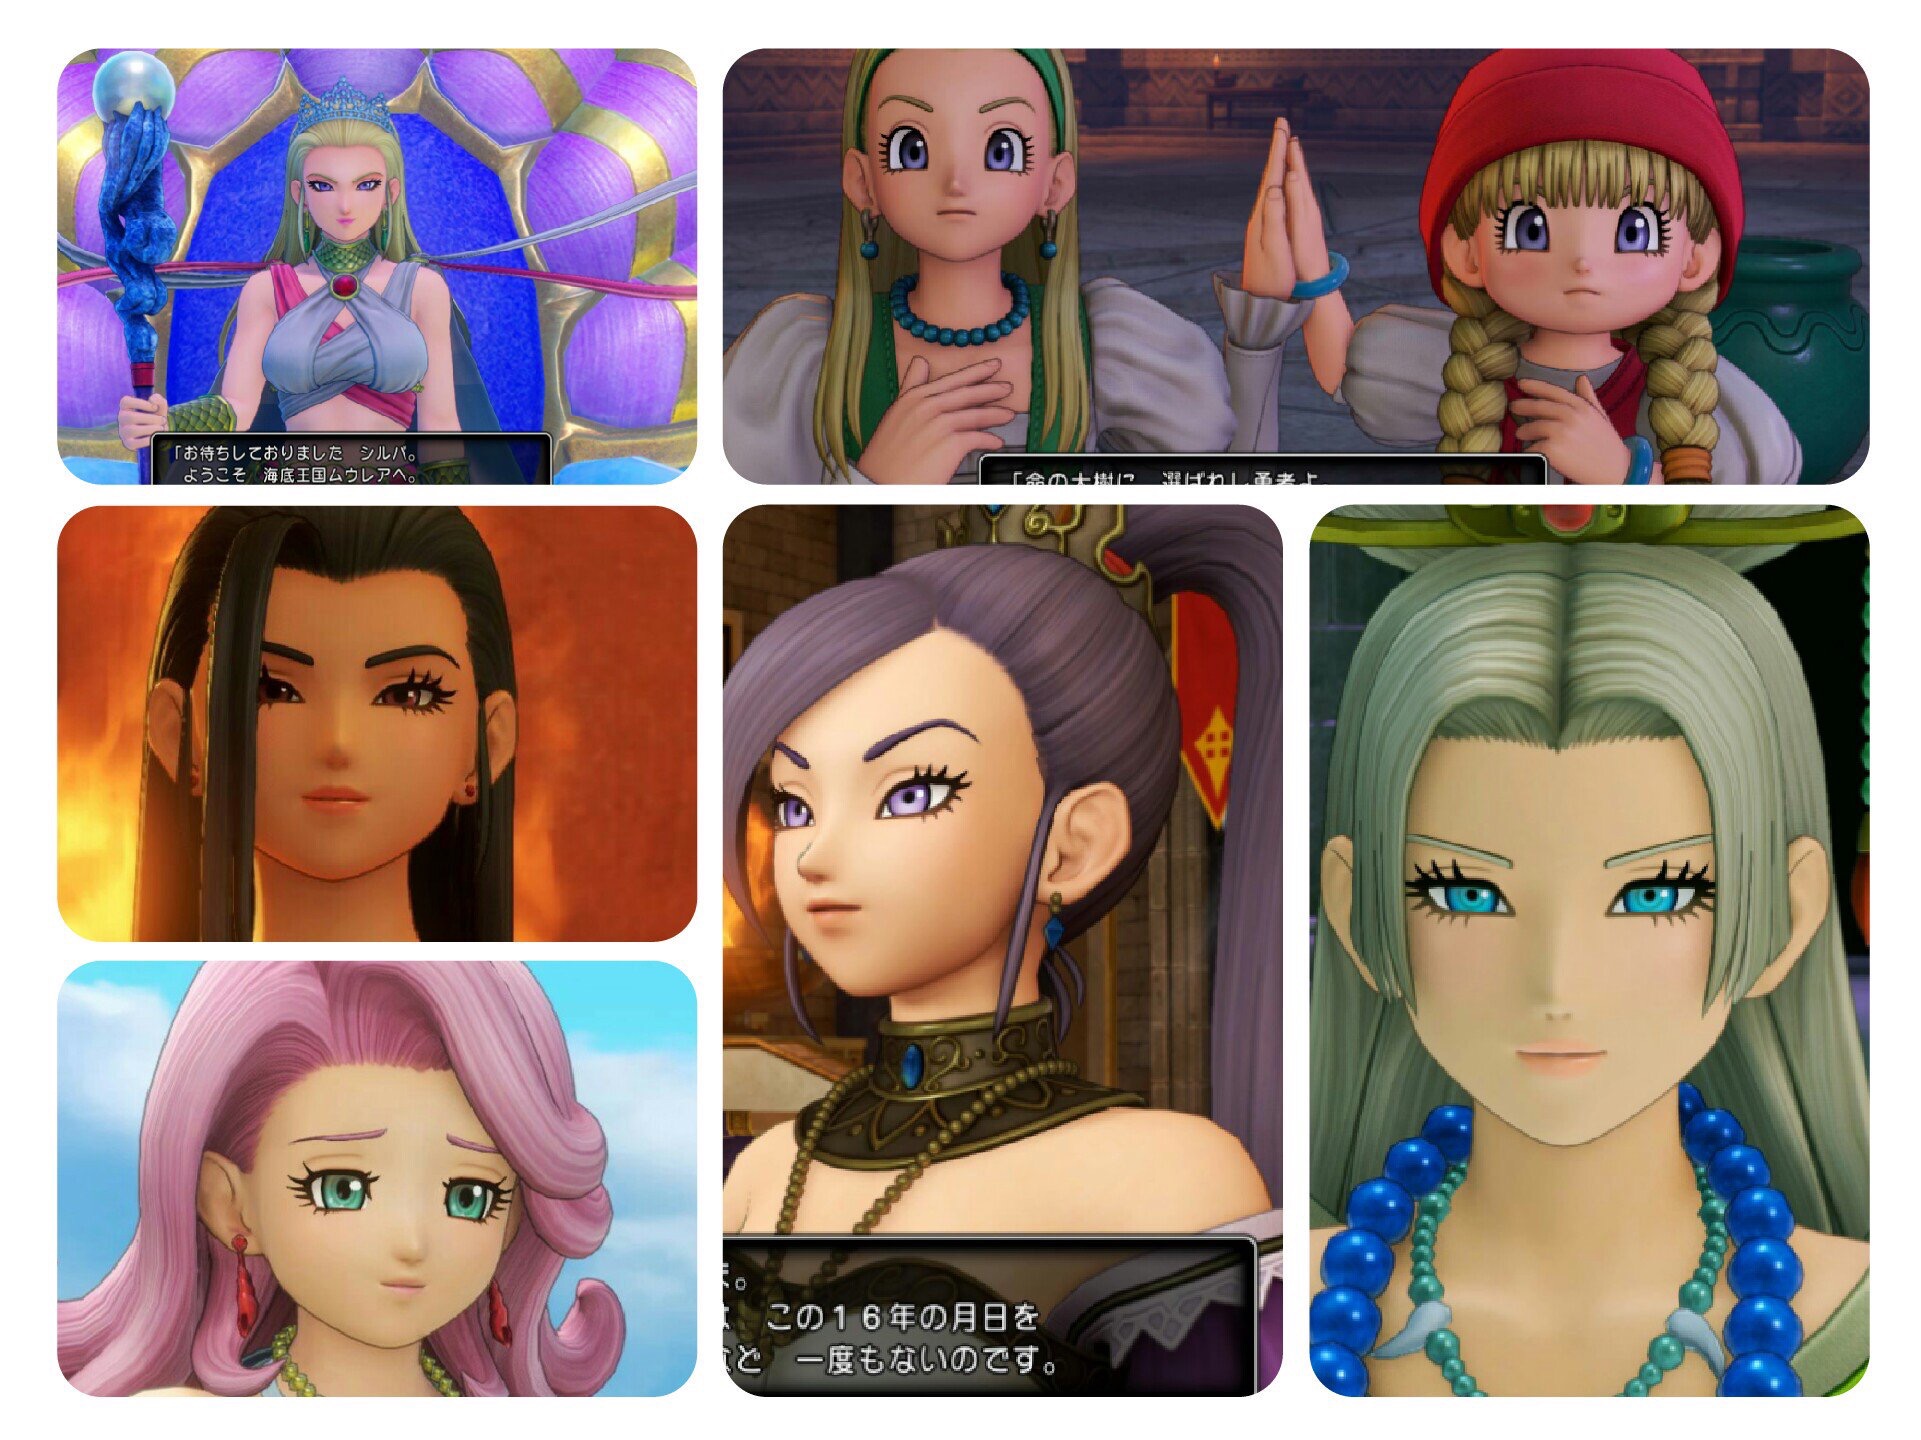 Japanese Role-Playing Game Trend: Big Sister Characters